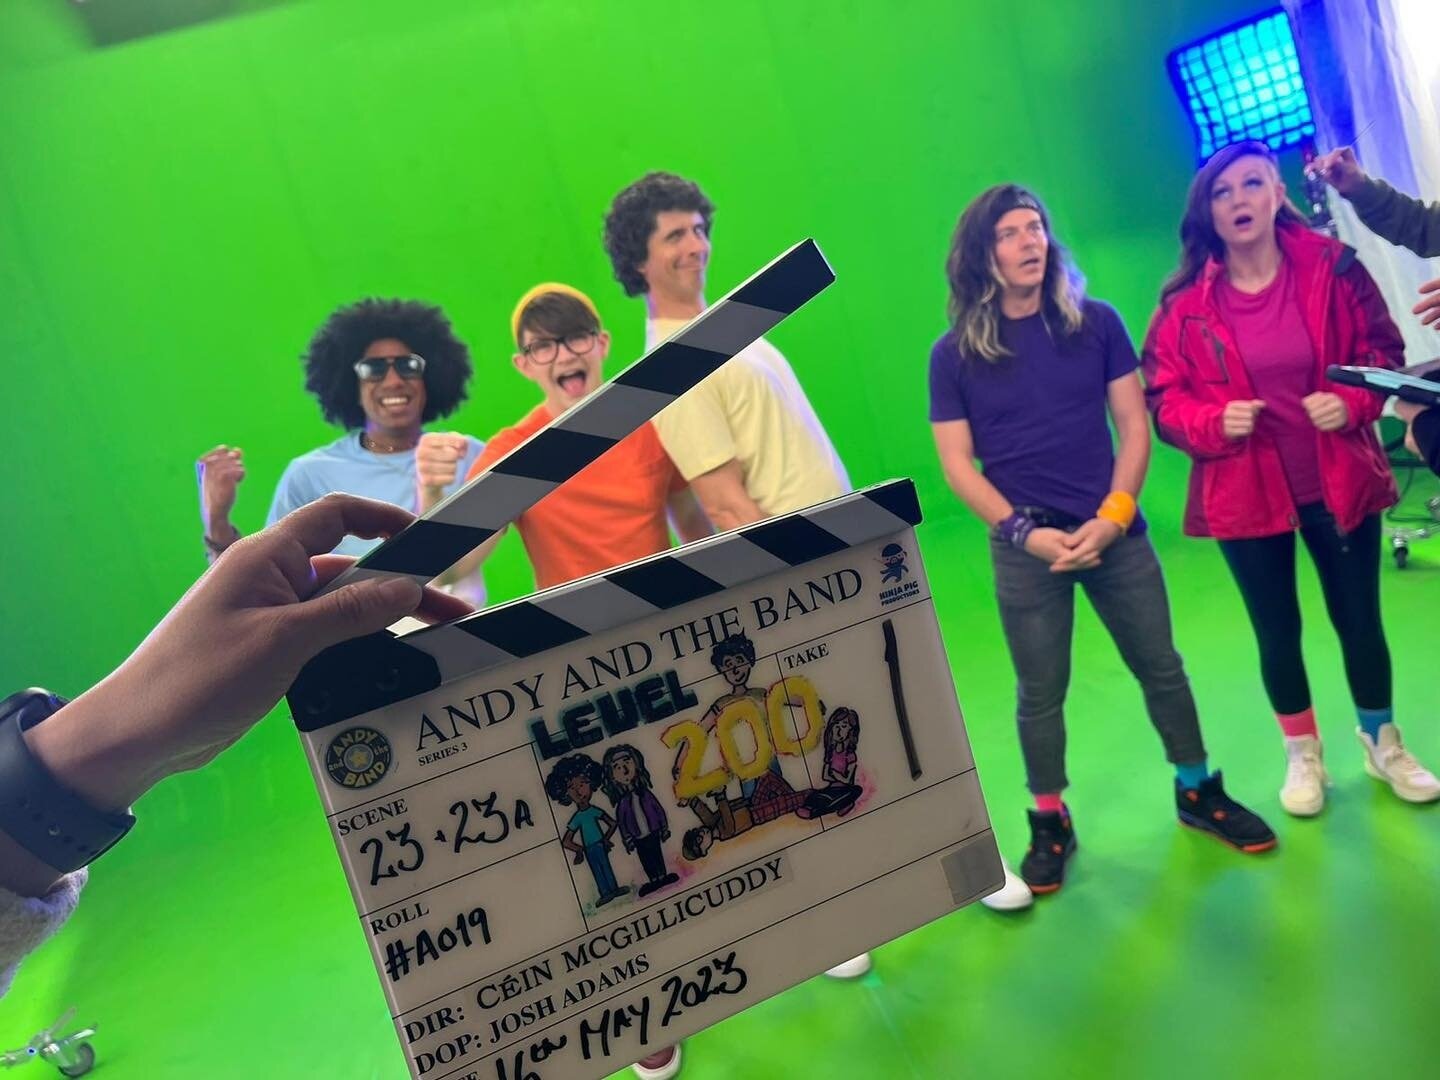 It&rsquo;s full throttle on the set of Andy and the Band Series 3. ⁠
⁠
🎬 200 slates in and it&rsquo;s only been a week&hellip;.we&rsquo;re shattered just thinking about that. Exciting times!!! 🎥📺 ⁠
⁠
#andyandtheband #ninjapigproductions #12weeksto